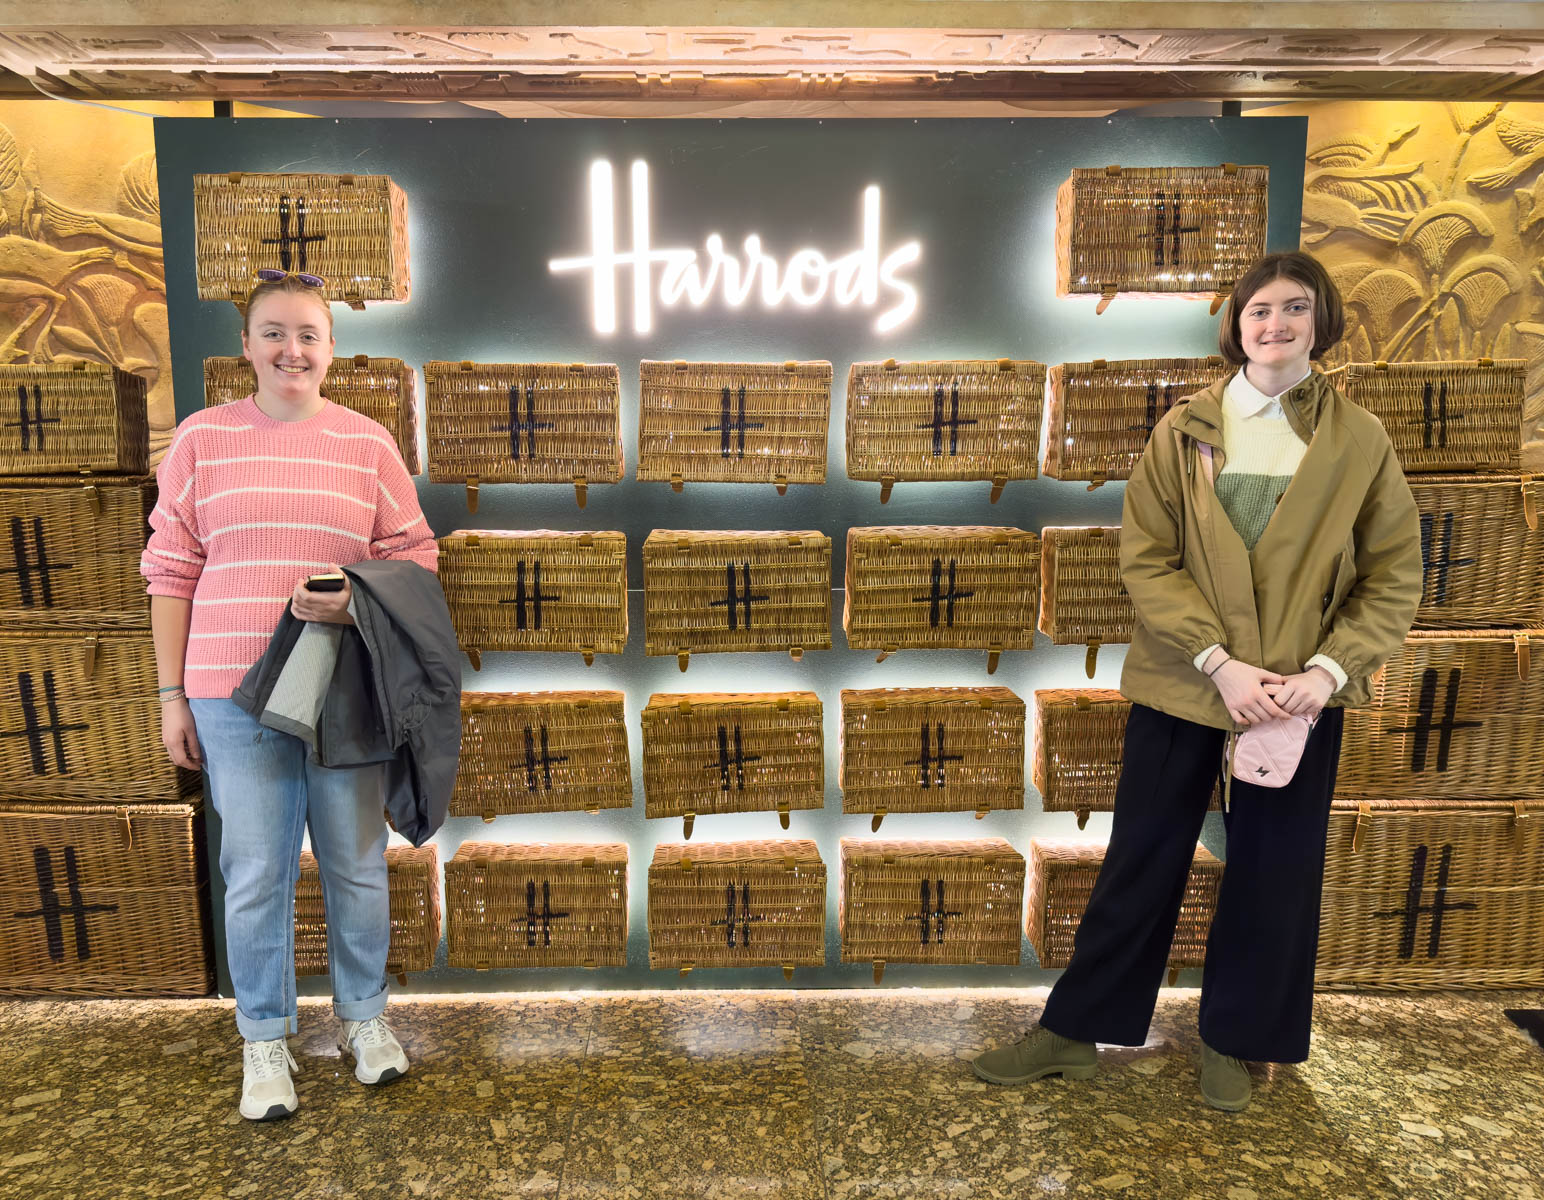 Two girls stand in front of the Harrods sign.